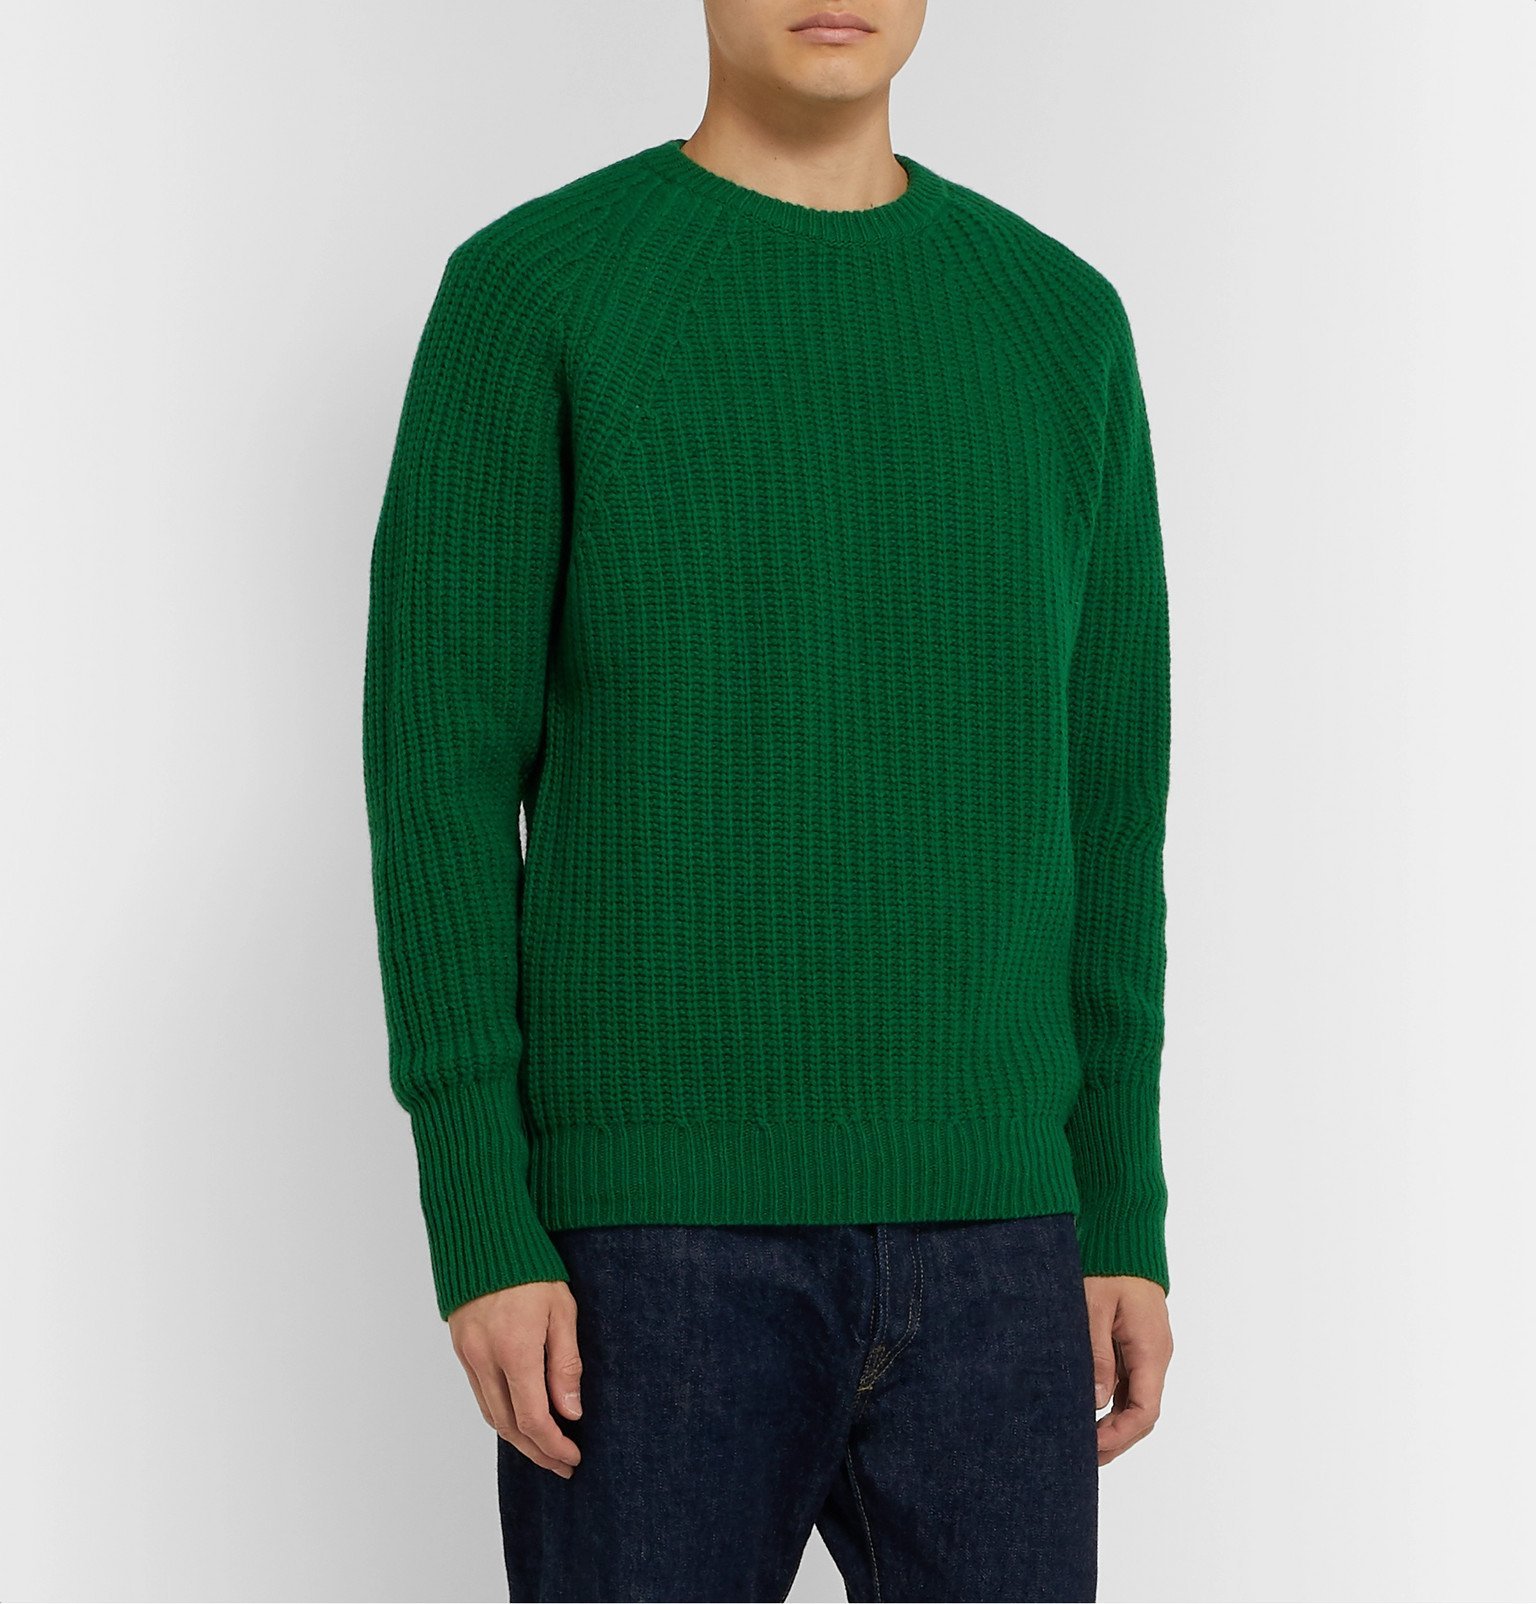 Barbour - White Label Tynedale Ribbed Wool Sweater - Green